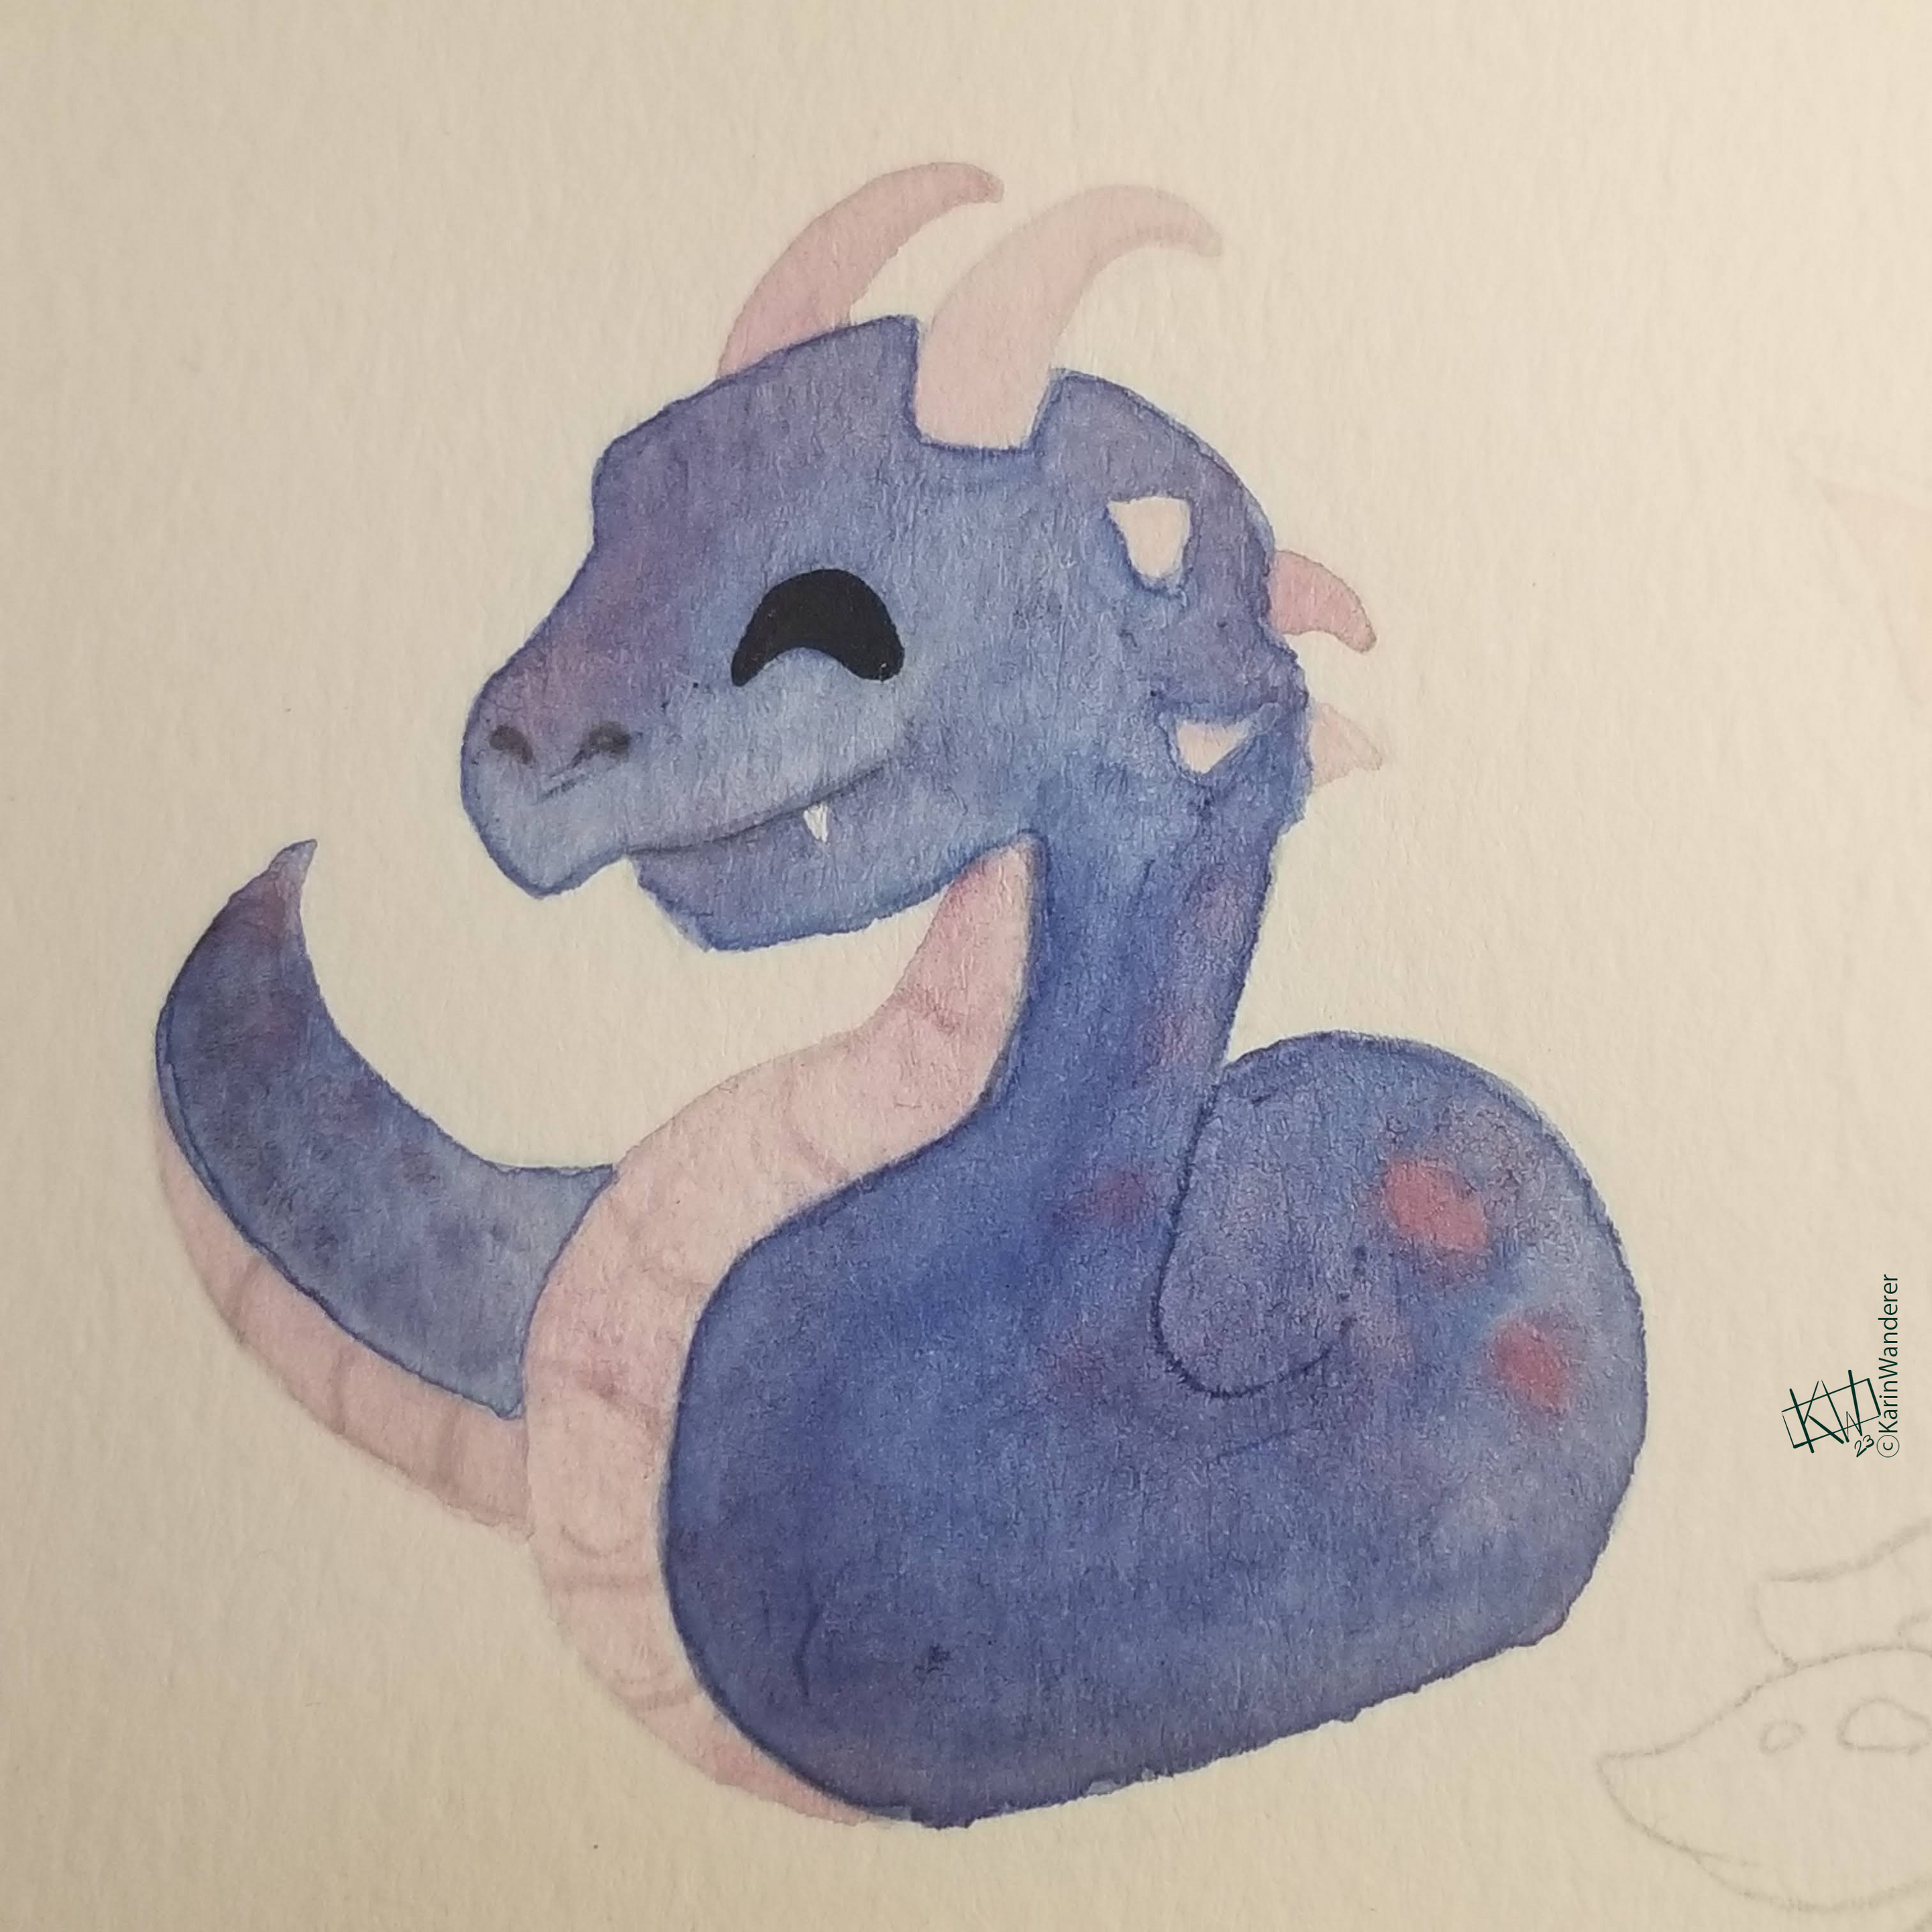 Watercolor of an adorable blue-purple-pink basilisk, smiling contentedly.